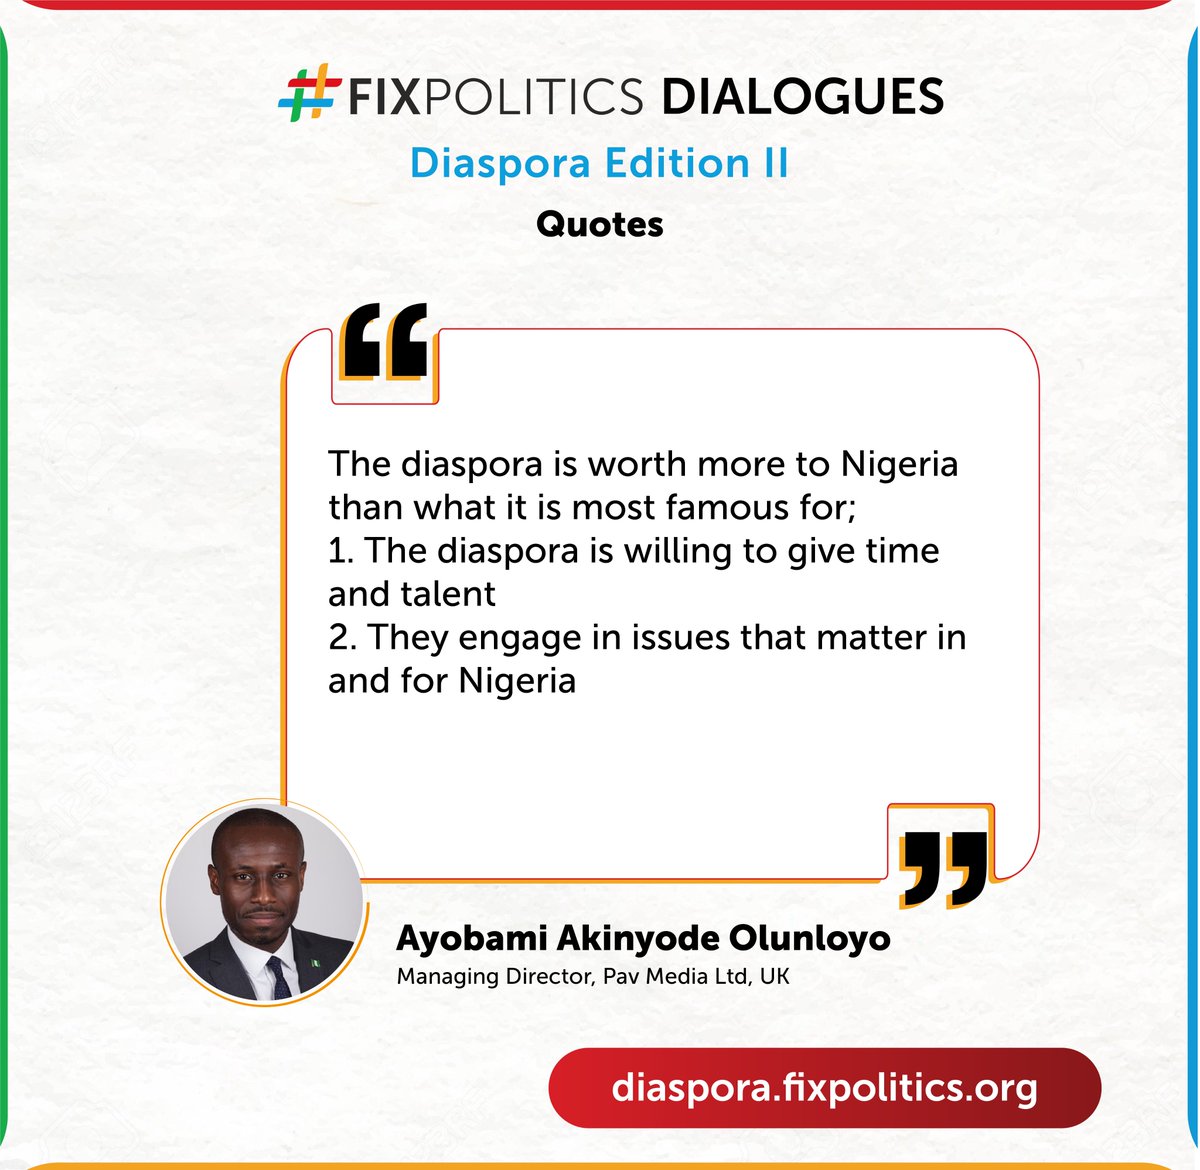 'The diaspora is worth more to Nigeria than what it is most famous for' - @ayobamiolunloyo at the #FixPolitics Diaspora Dialogue II. Watch this space for the next edition.